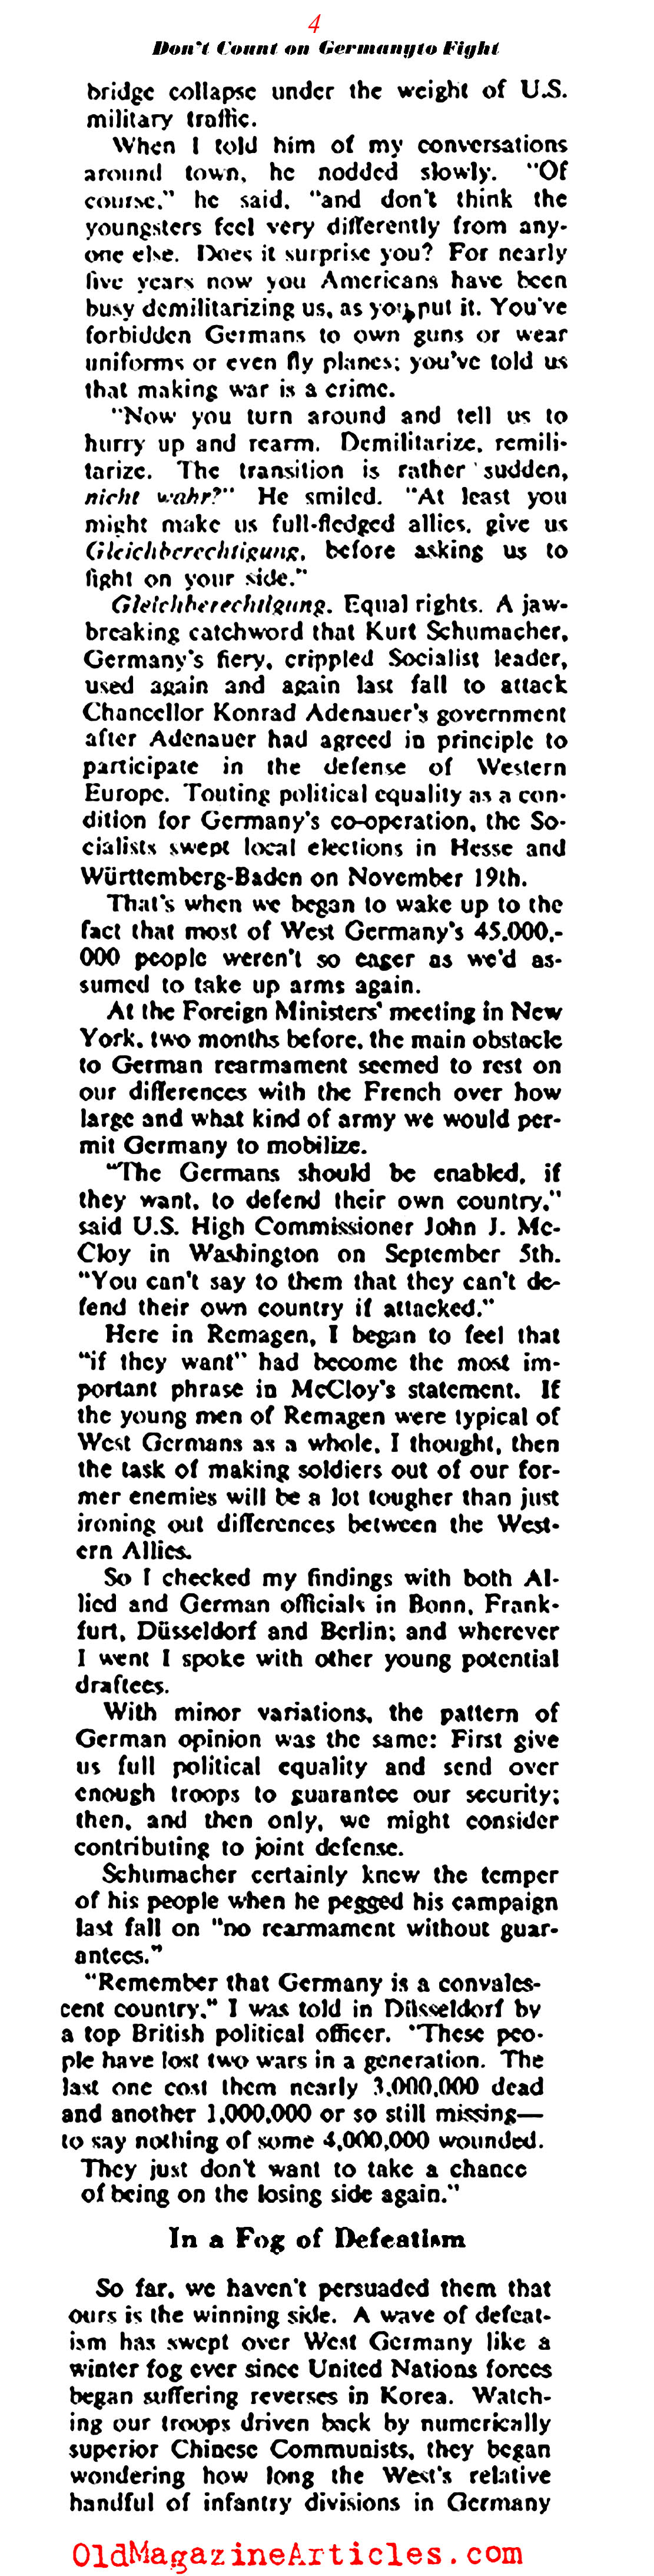 Germany and the Next War (Collier's Magazine, 1951)